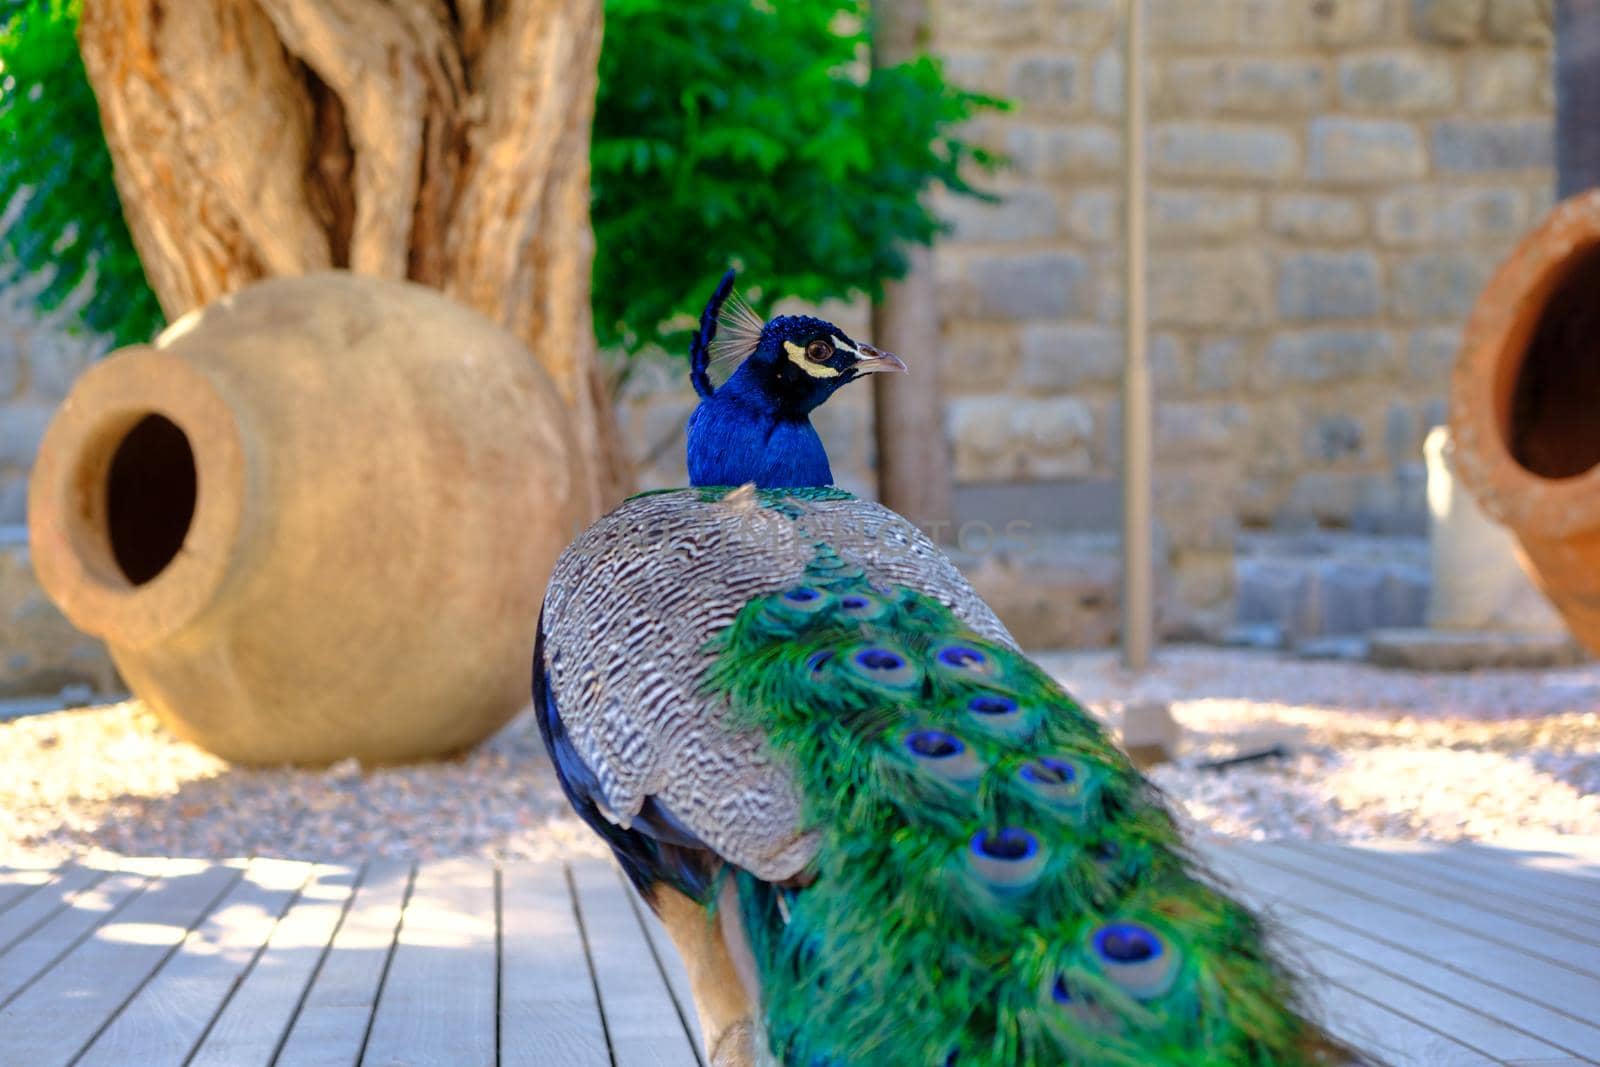 Peacock with feathers. Peacock in the garden with jag by igor010